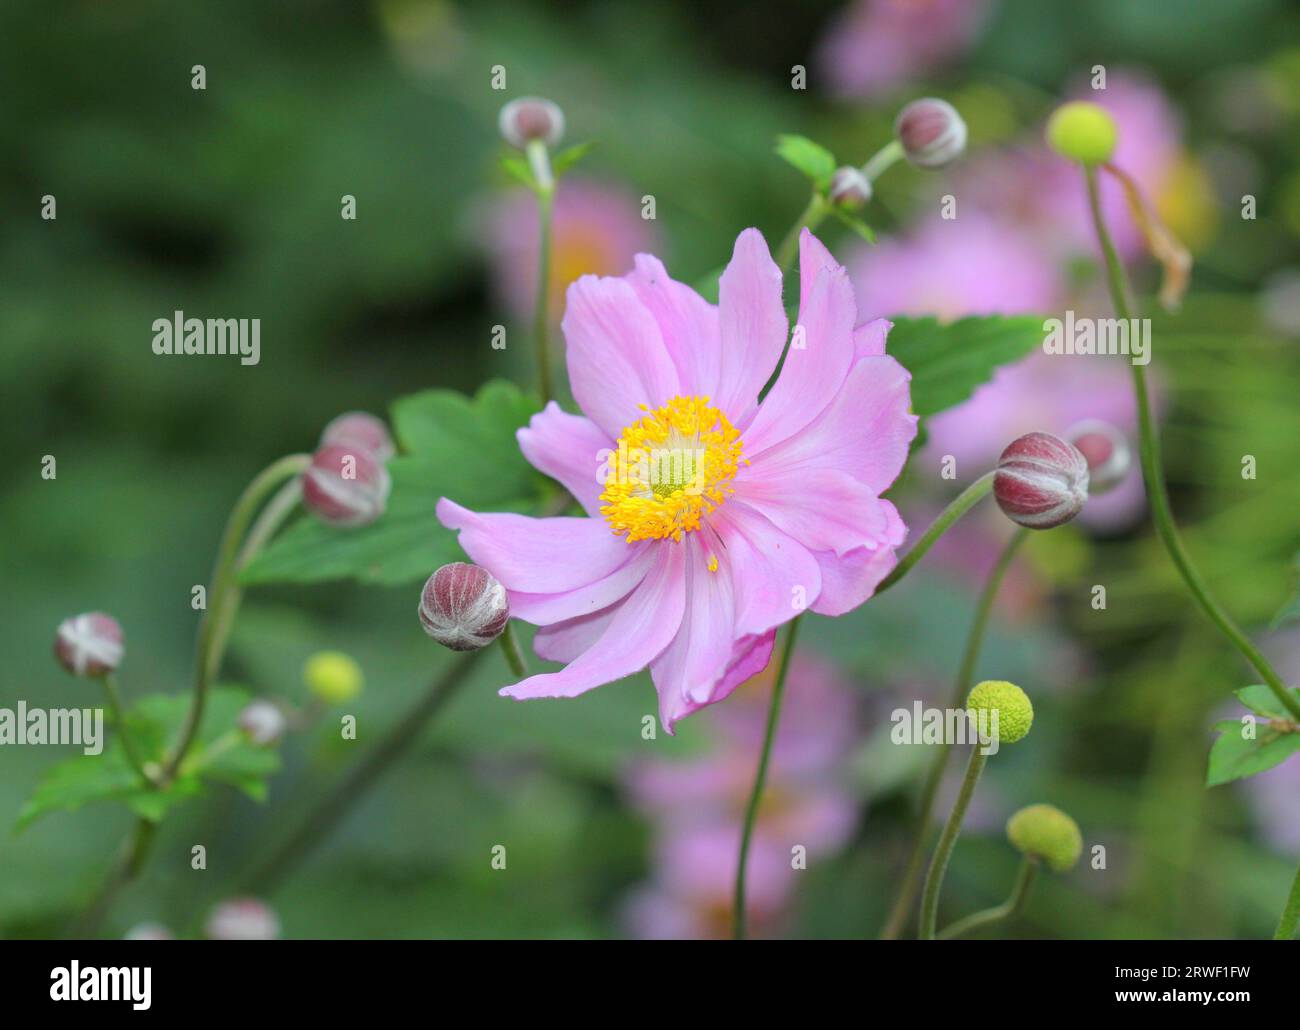 A close up of the Japanese Anemone flower Stock Photo